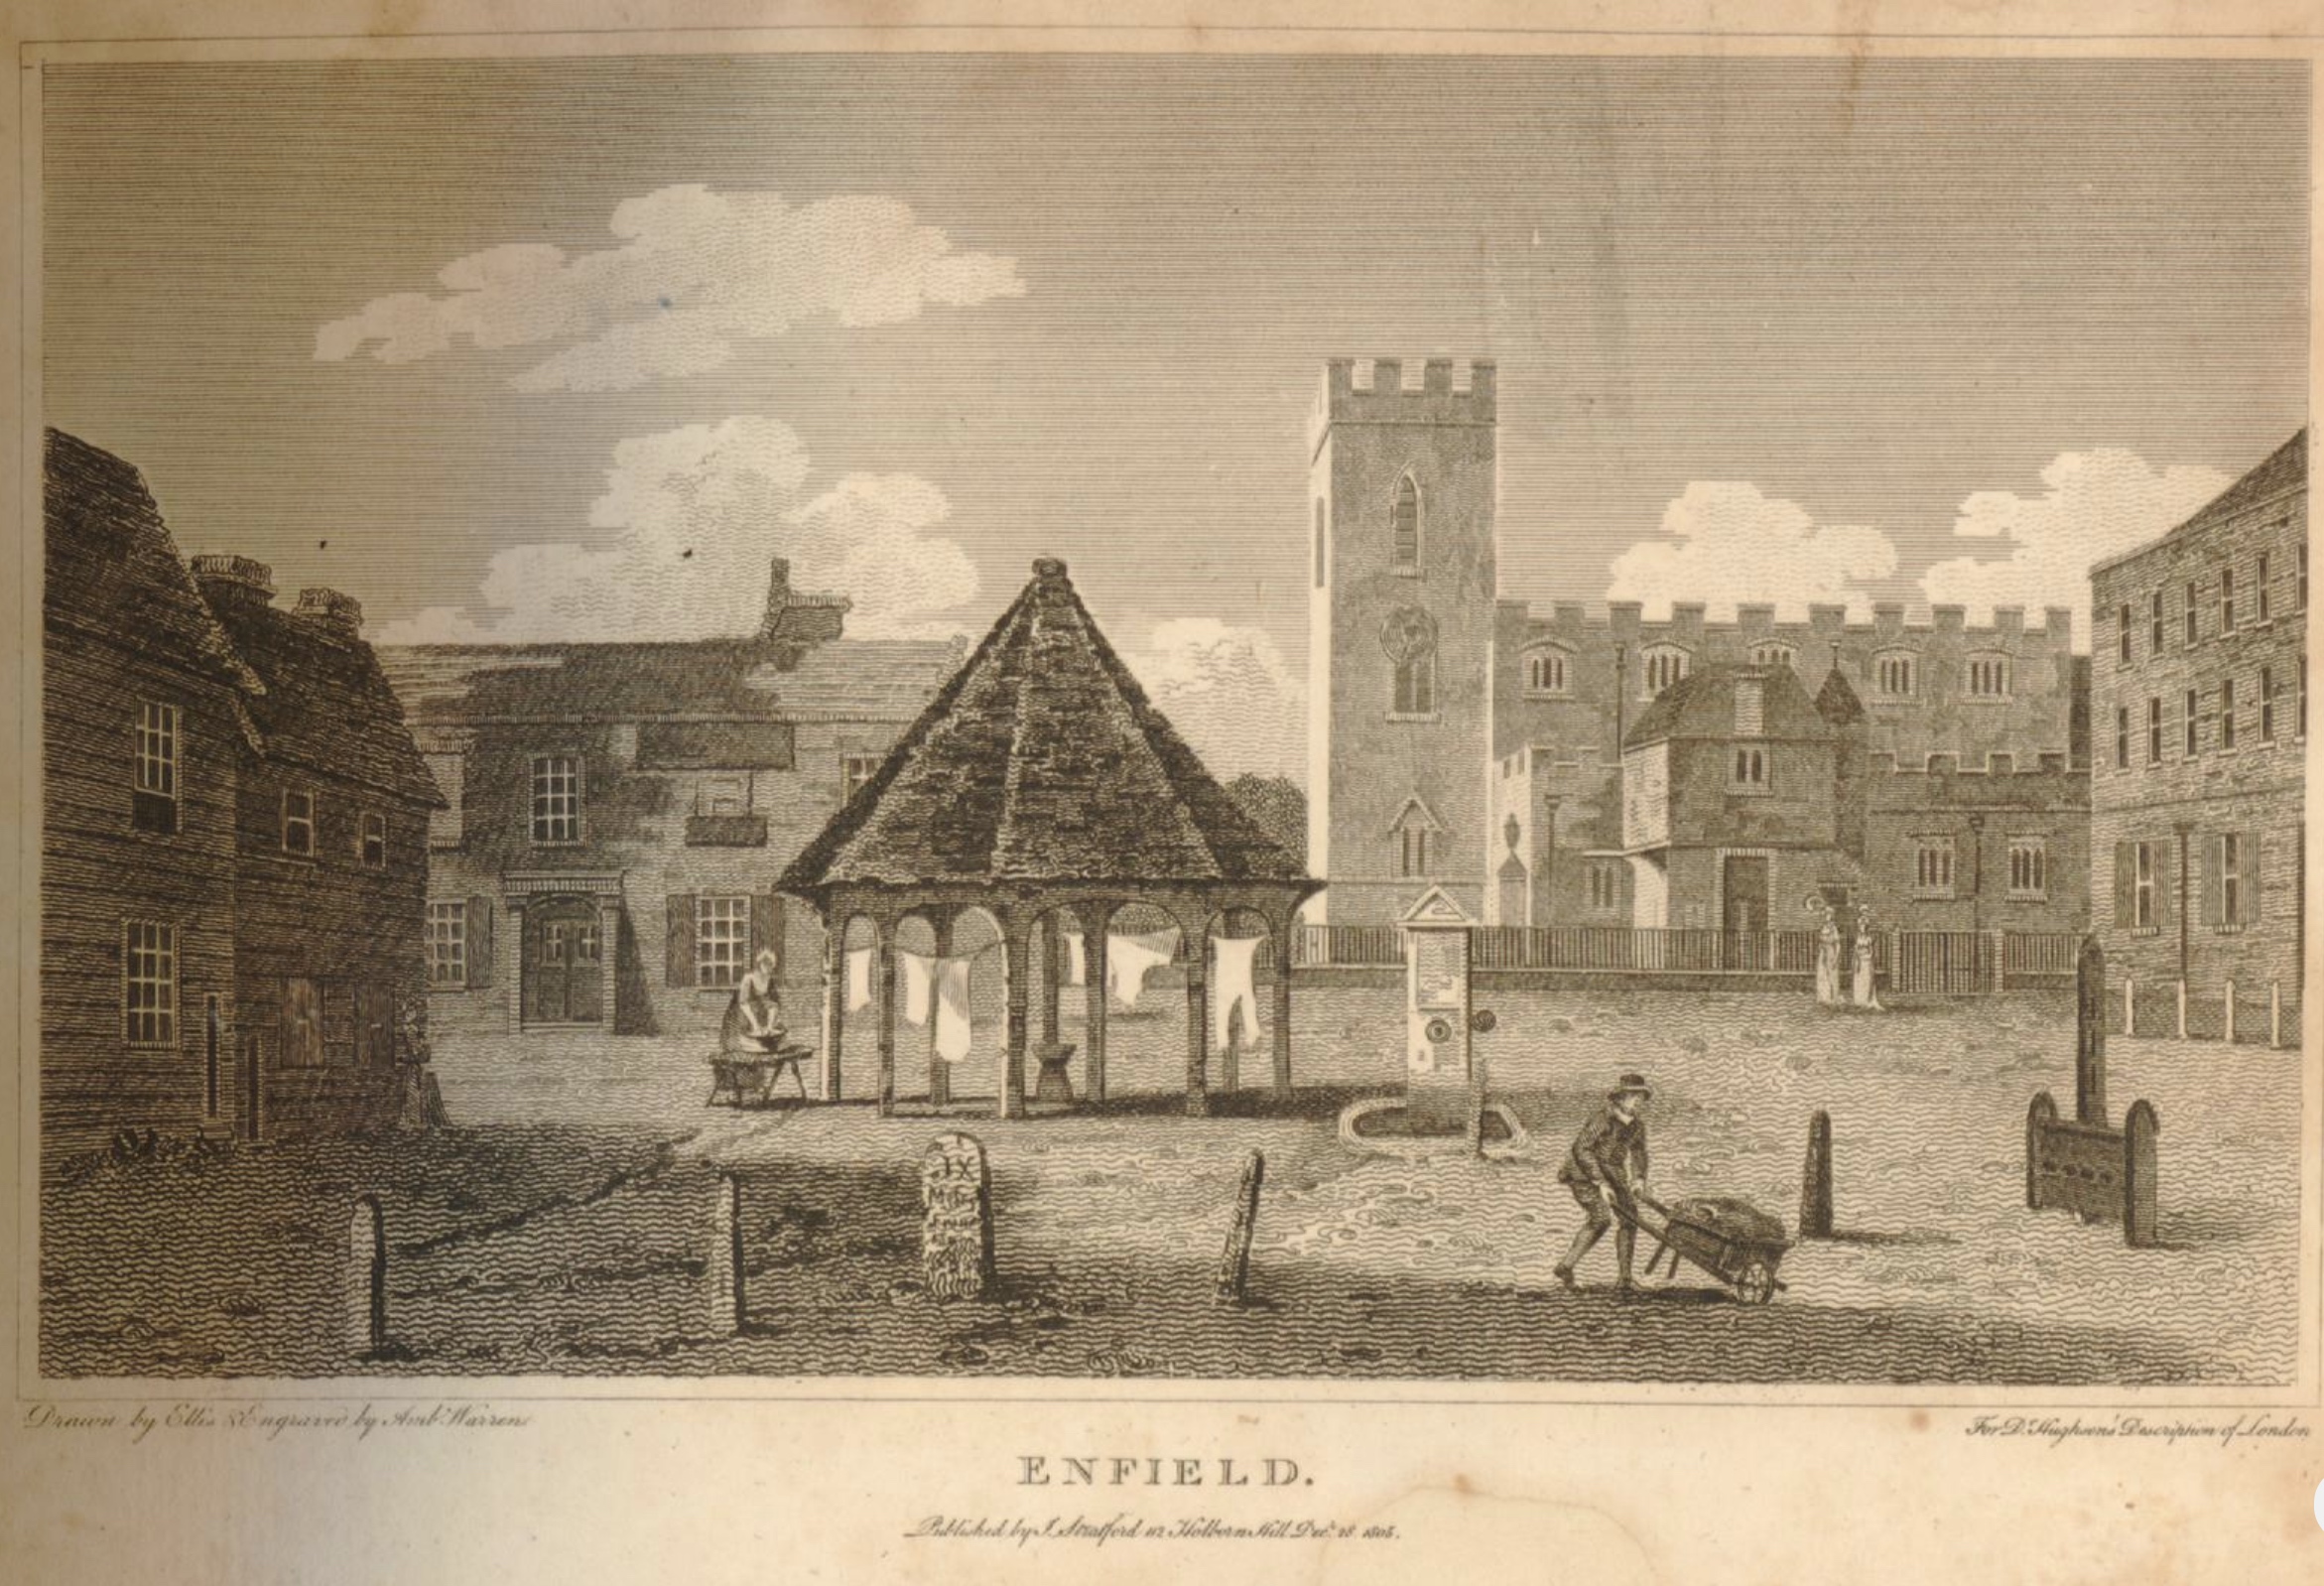 Town square, Enfield, 1805, which Keats no doubt was acquainted with (British
        Museum 1927,1126.1.26.67). Click to enlarge.